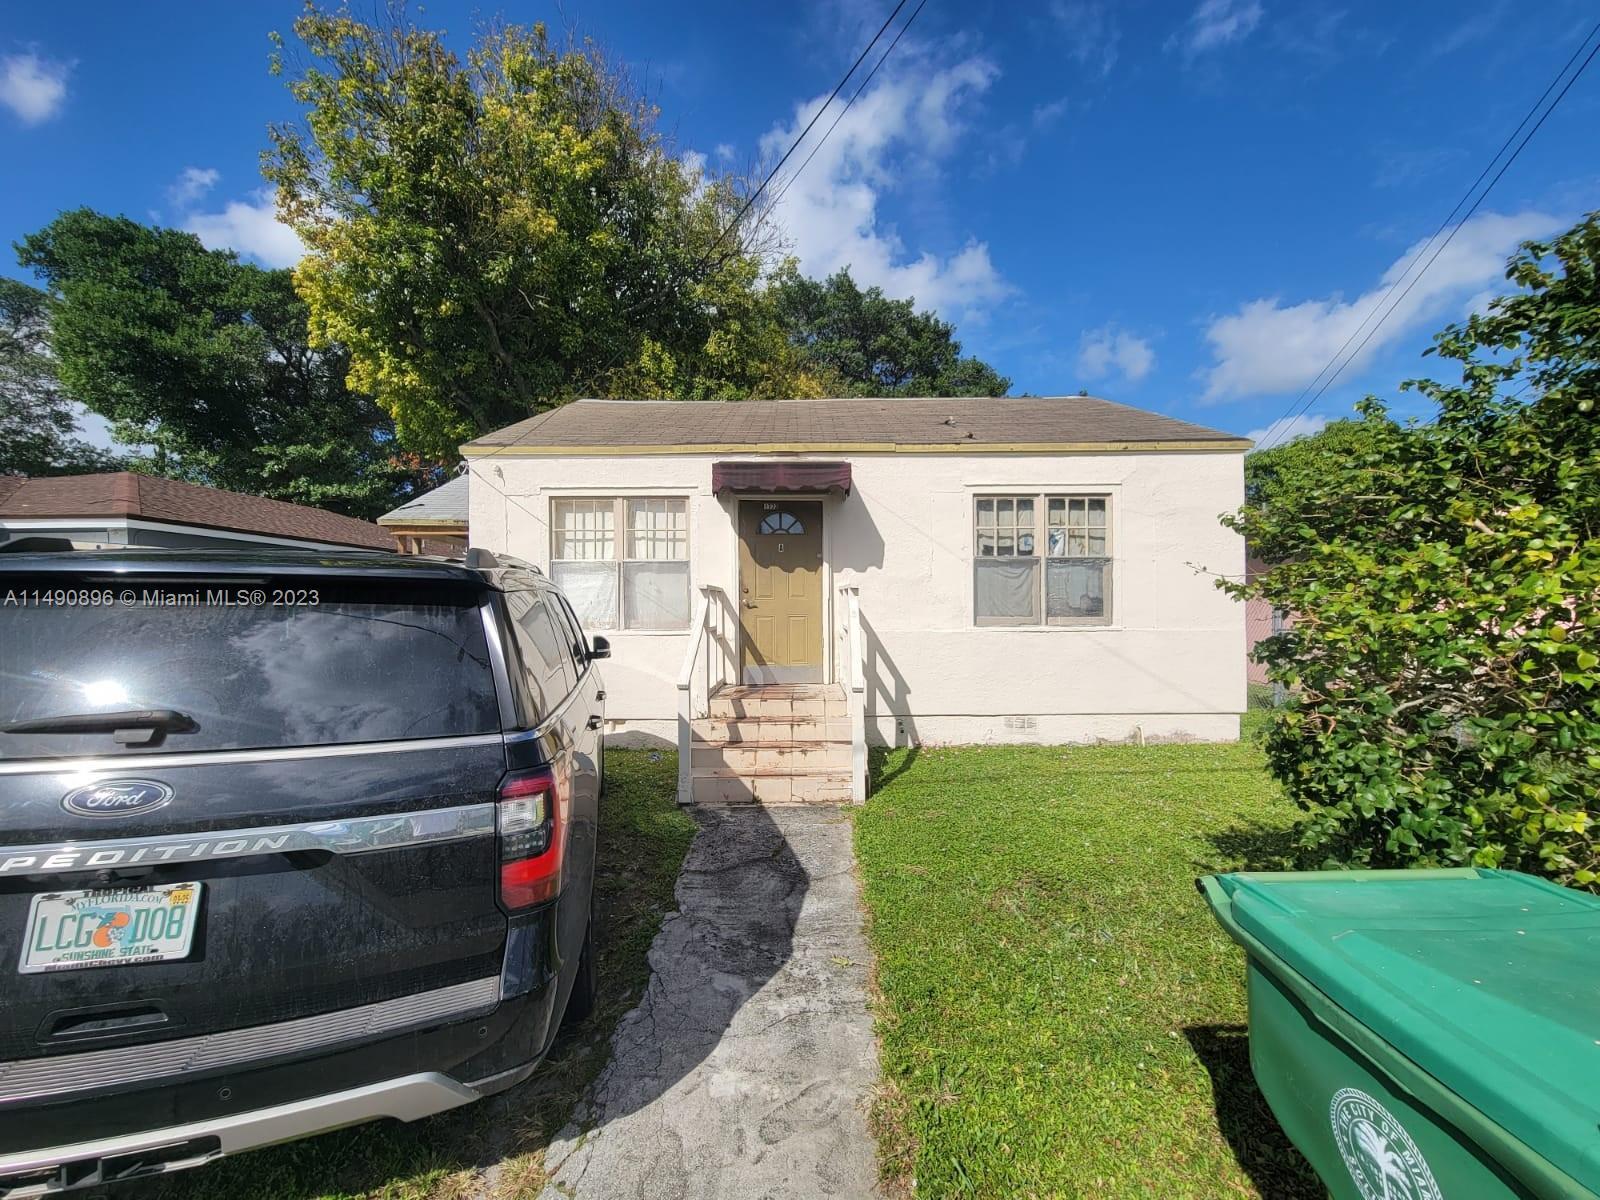 Photo of 1773 NW 45th St in Miami, FL